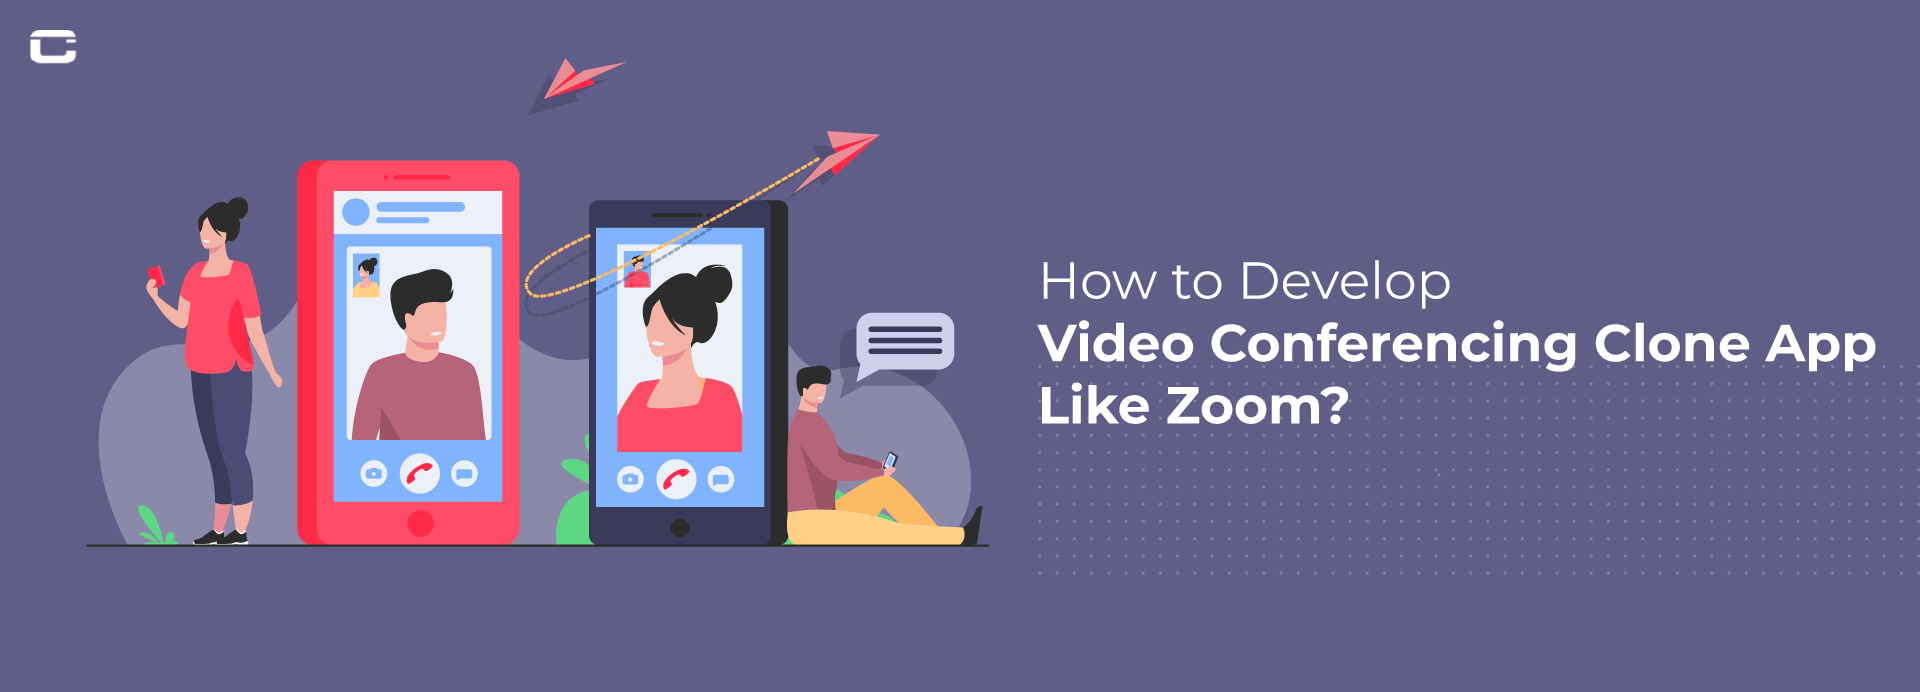 How to Develop Video Conferencing Clone App Like Zoom (Trends + Features + Benefits + Cost)